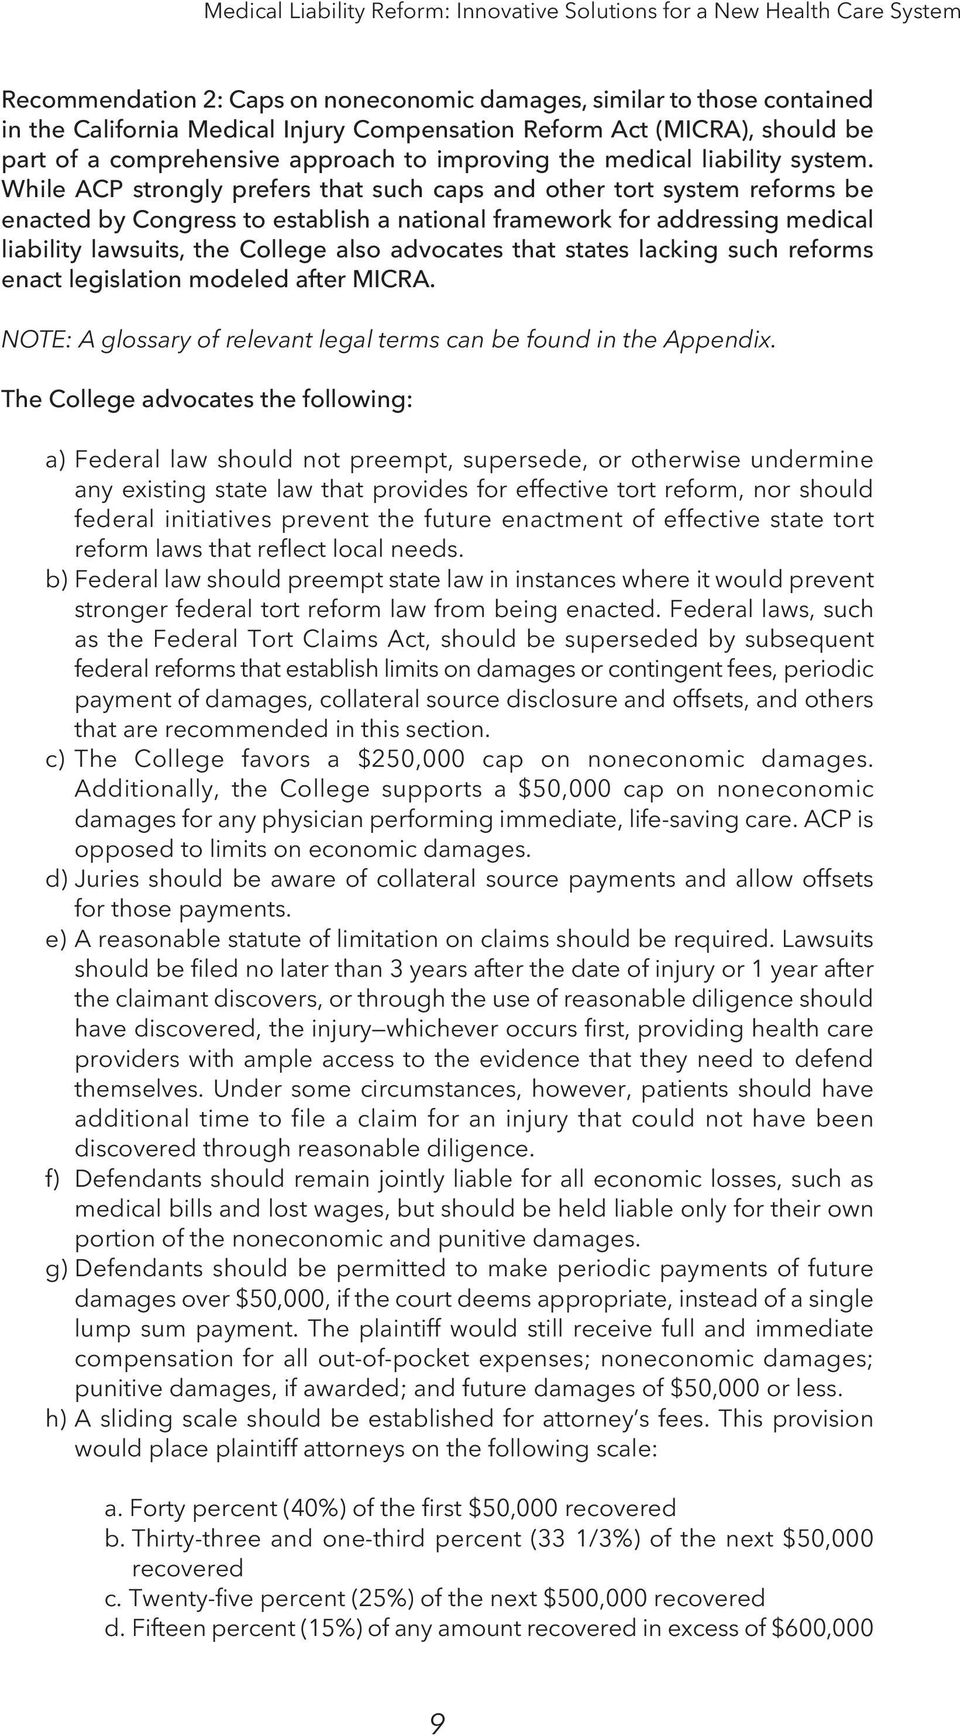 While ACP strongly prefers that such caps and other tort system reforms be enacted by Congress to establish a national framework for addressing medical liability lawsuits, the College also advocates